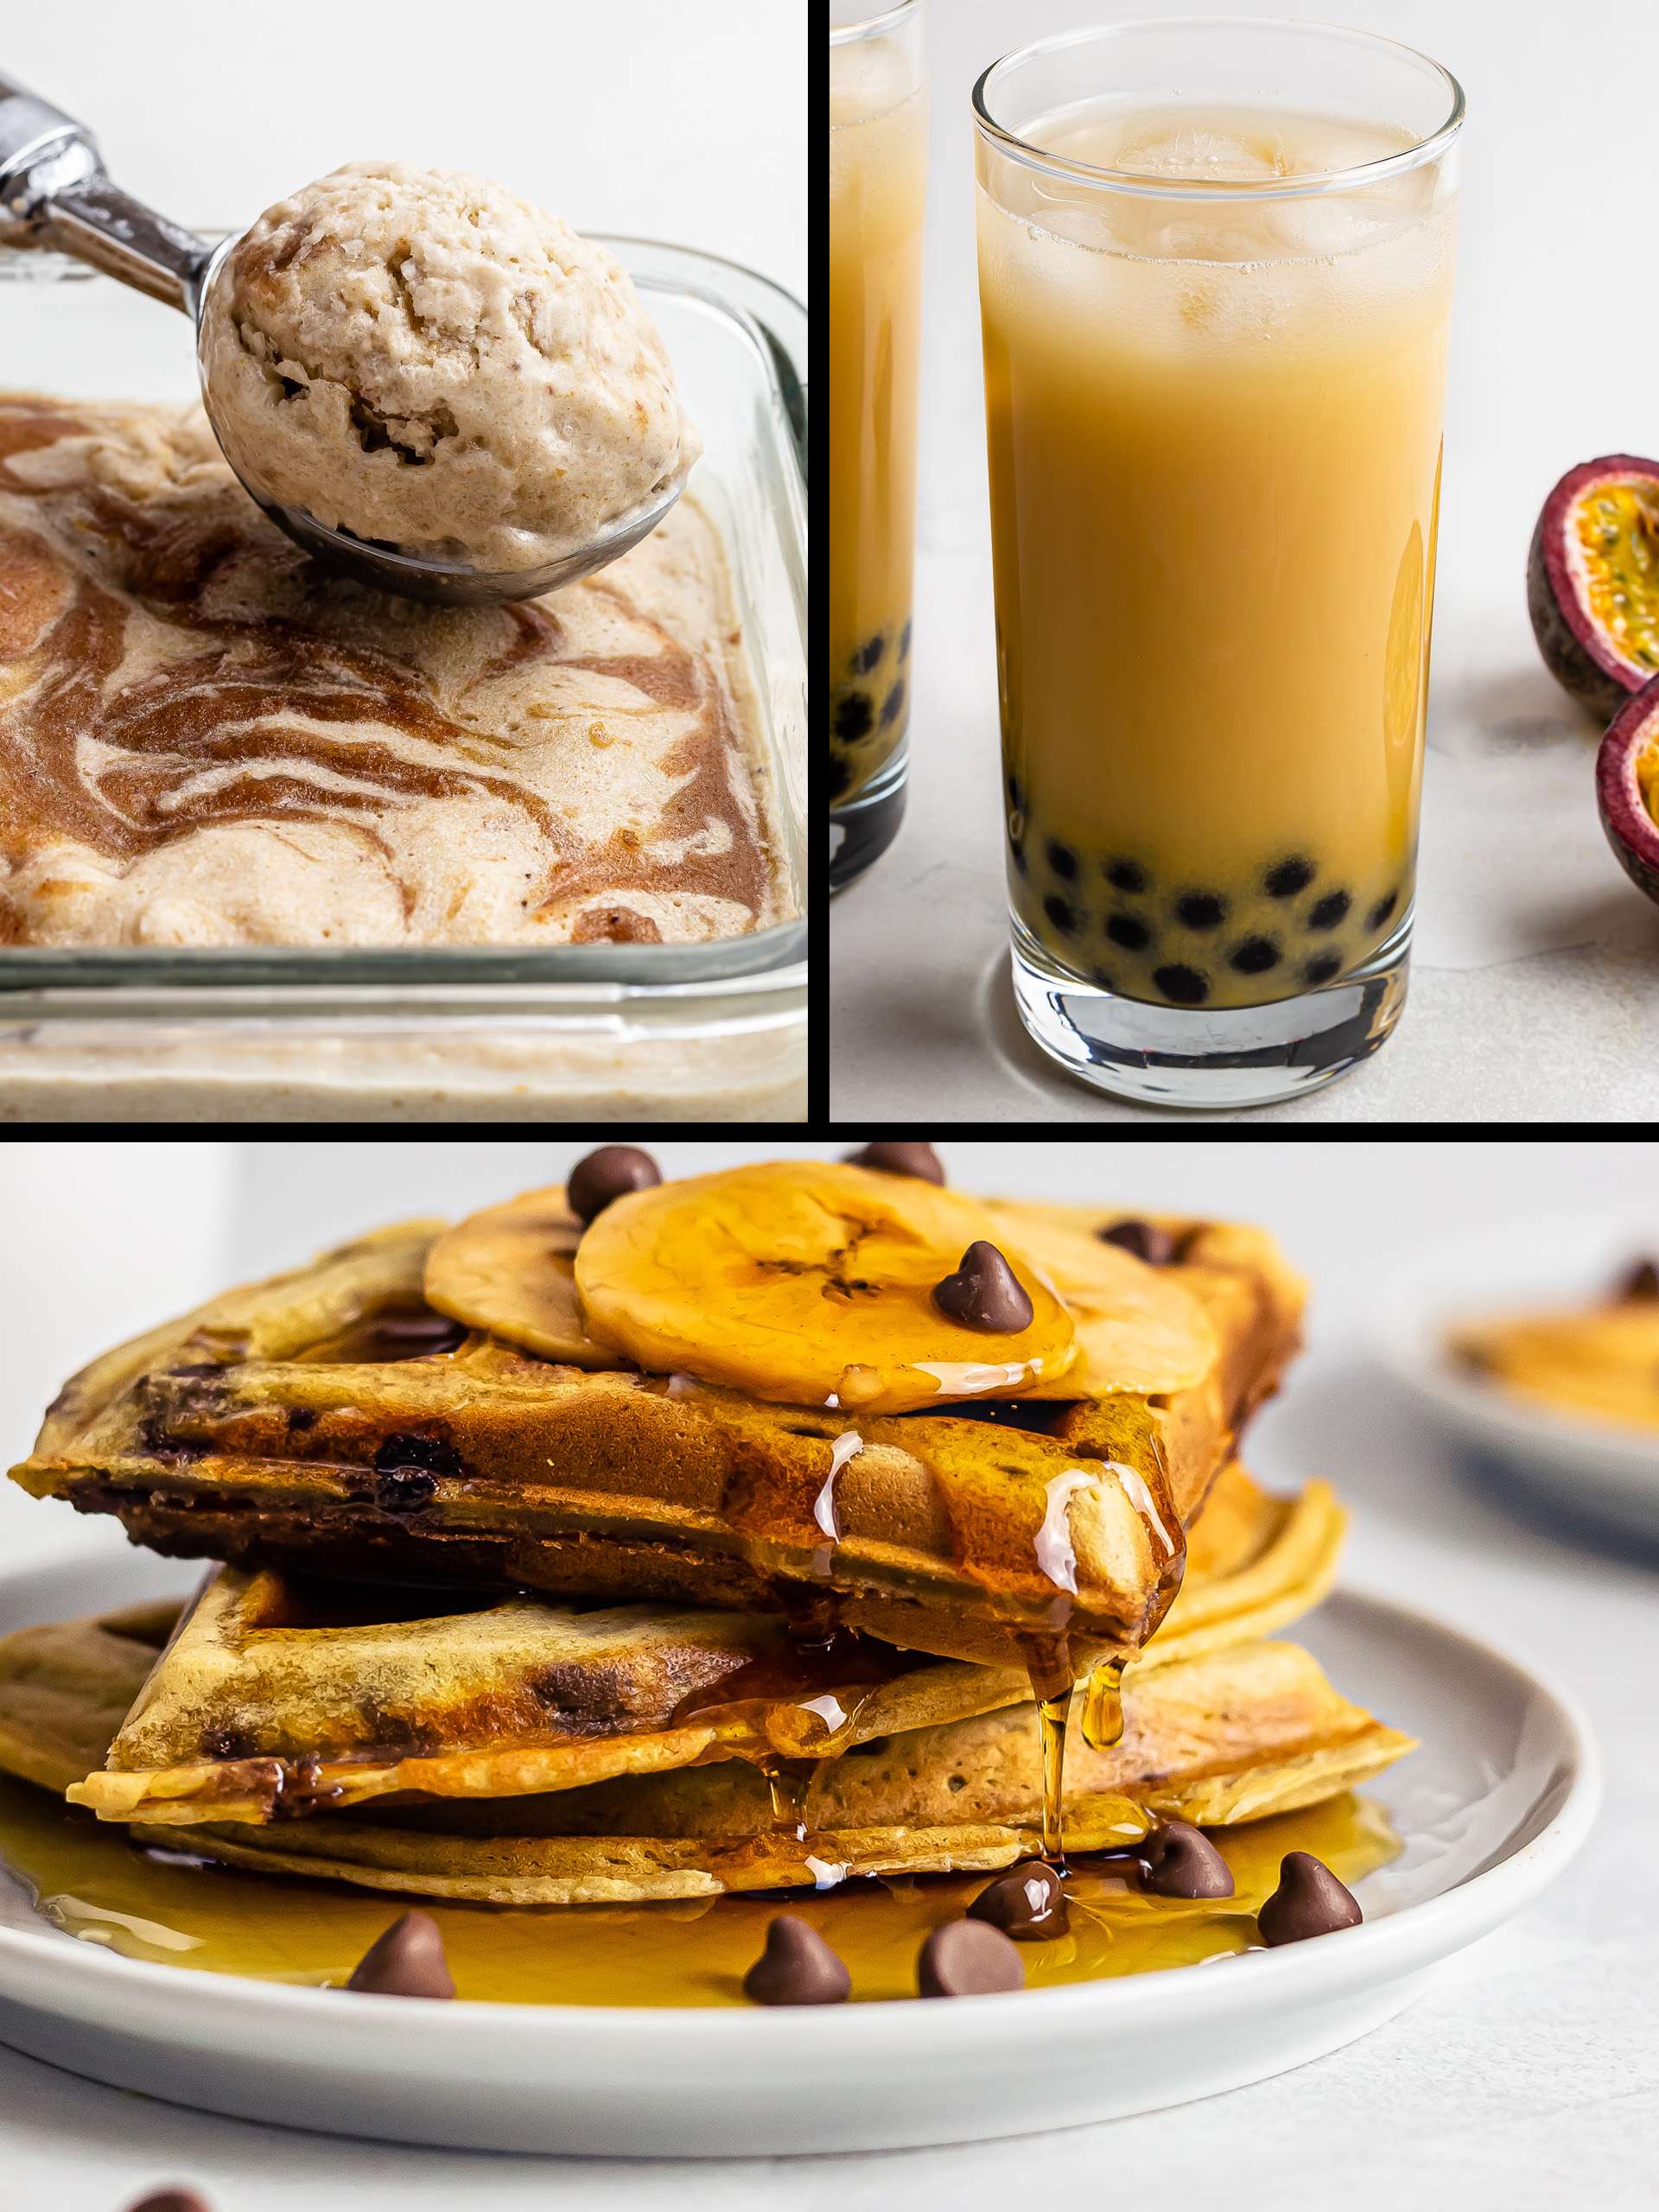 10 Tasty Tropical Recipes with Coconut Milk